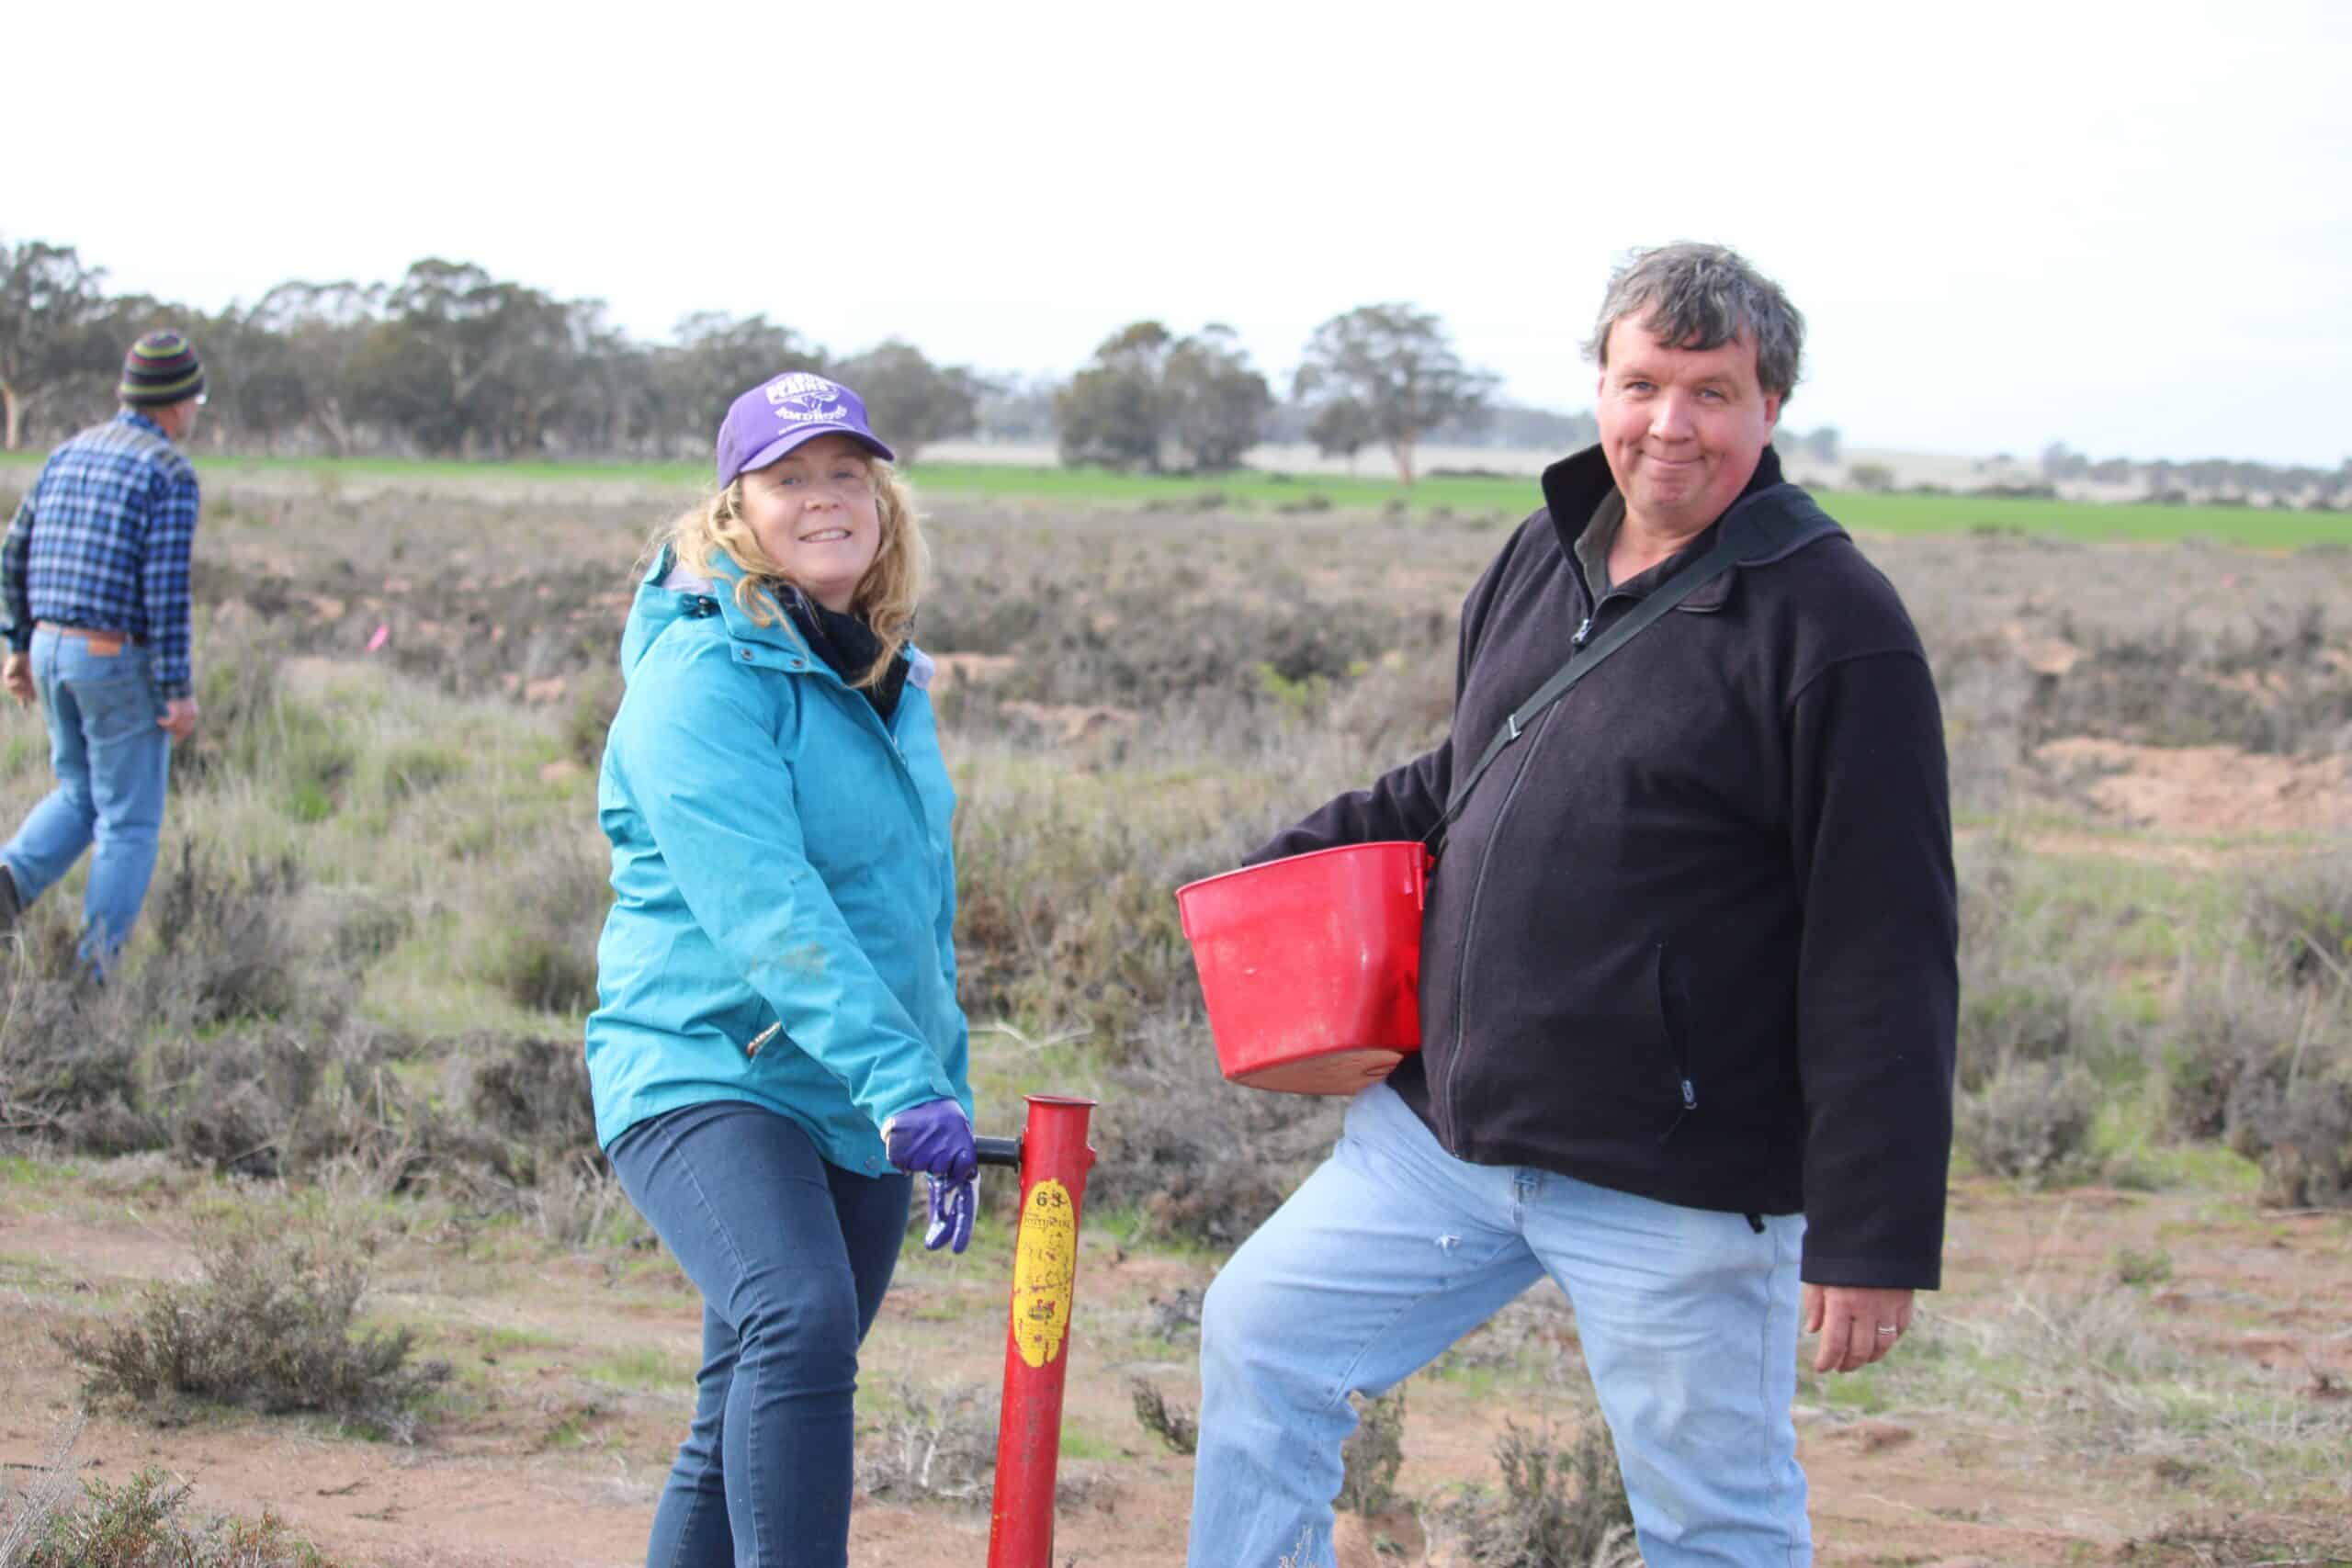 Man and a woman standing in a field during tree planting event. Woman wearing a bright blue jacket holding a pottiputki (hand-held tree planting device). Man wearing a black sweater holding a bucket full of seedlings.